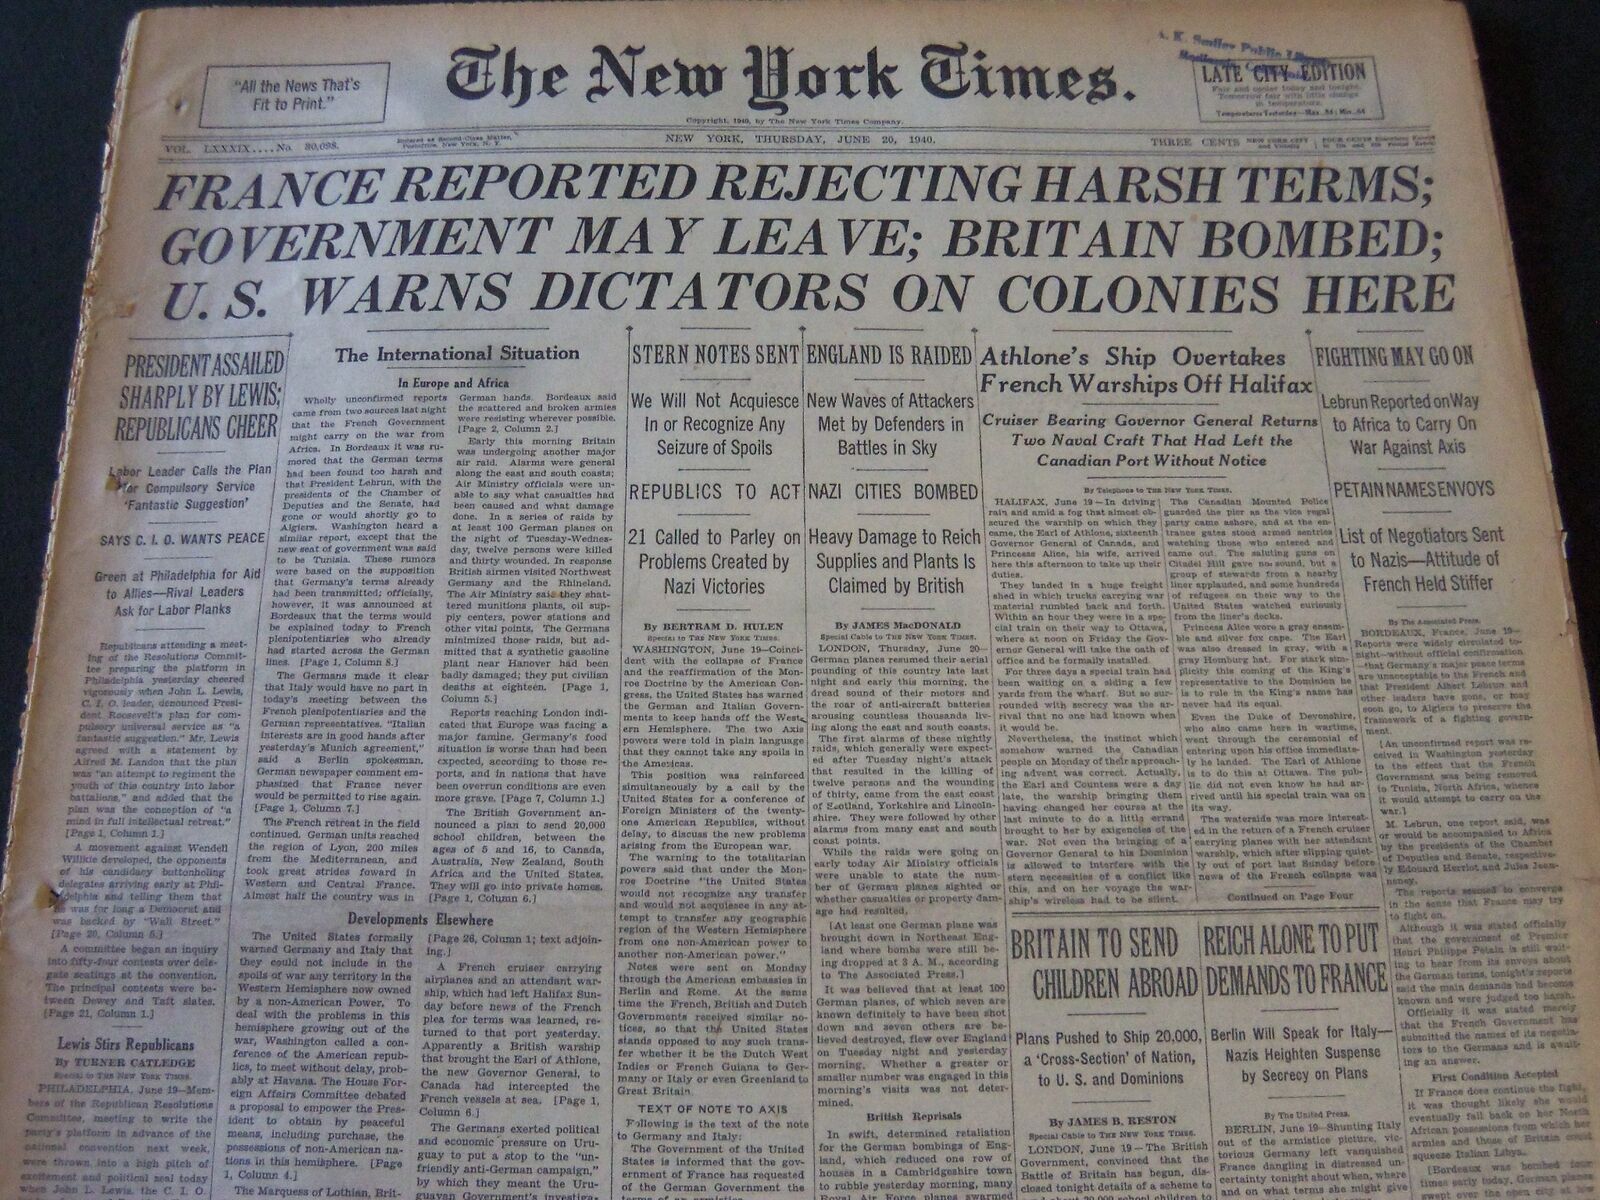 1940 JUNE 20 NEW YORK TIMES - FRANCE REPORTED REJECTING HARSH TERMS - NT 5901